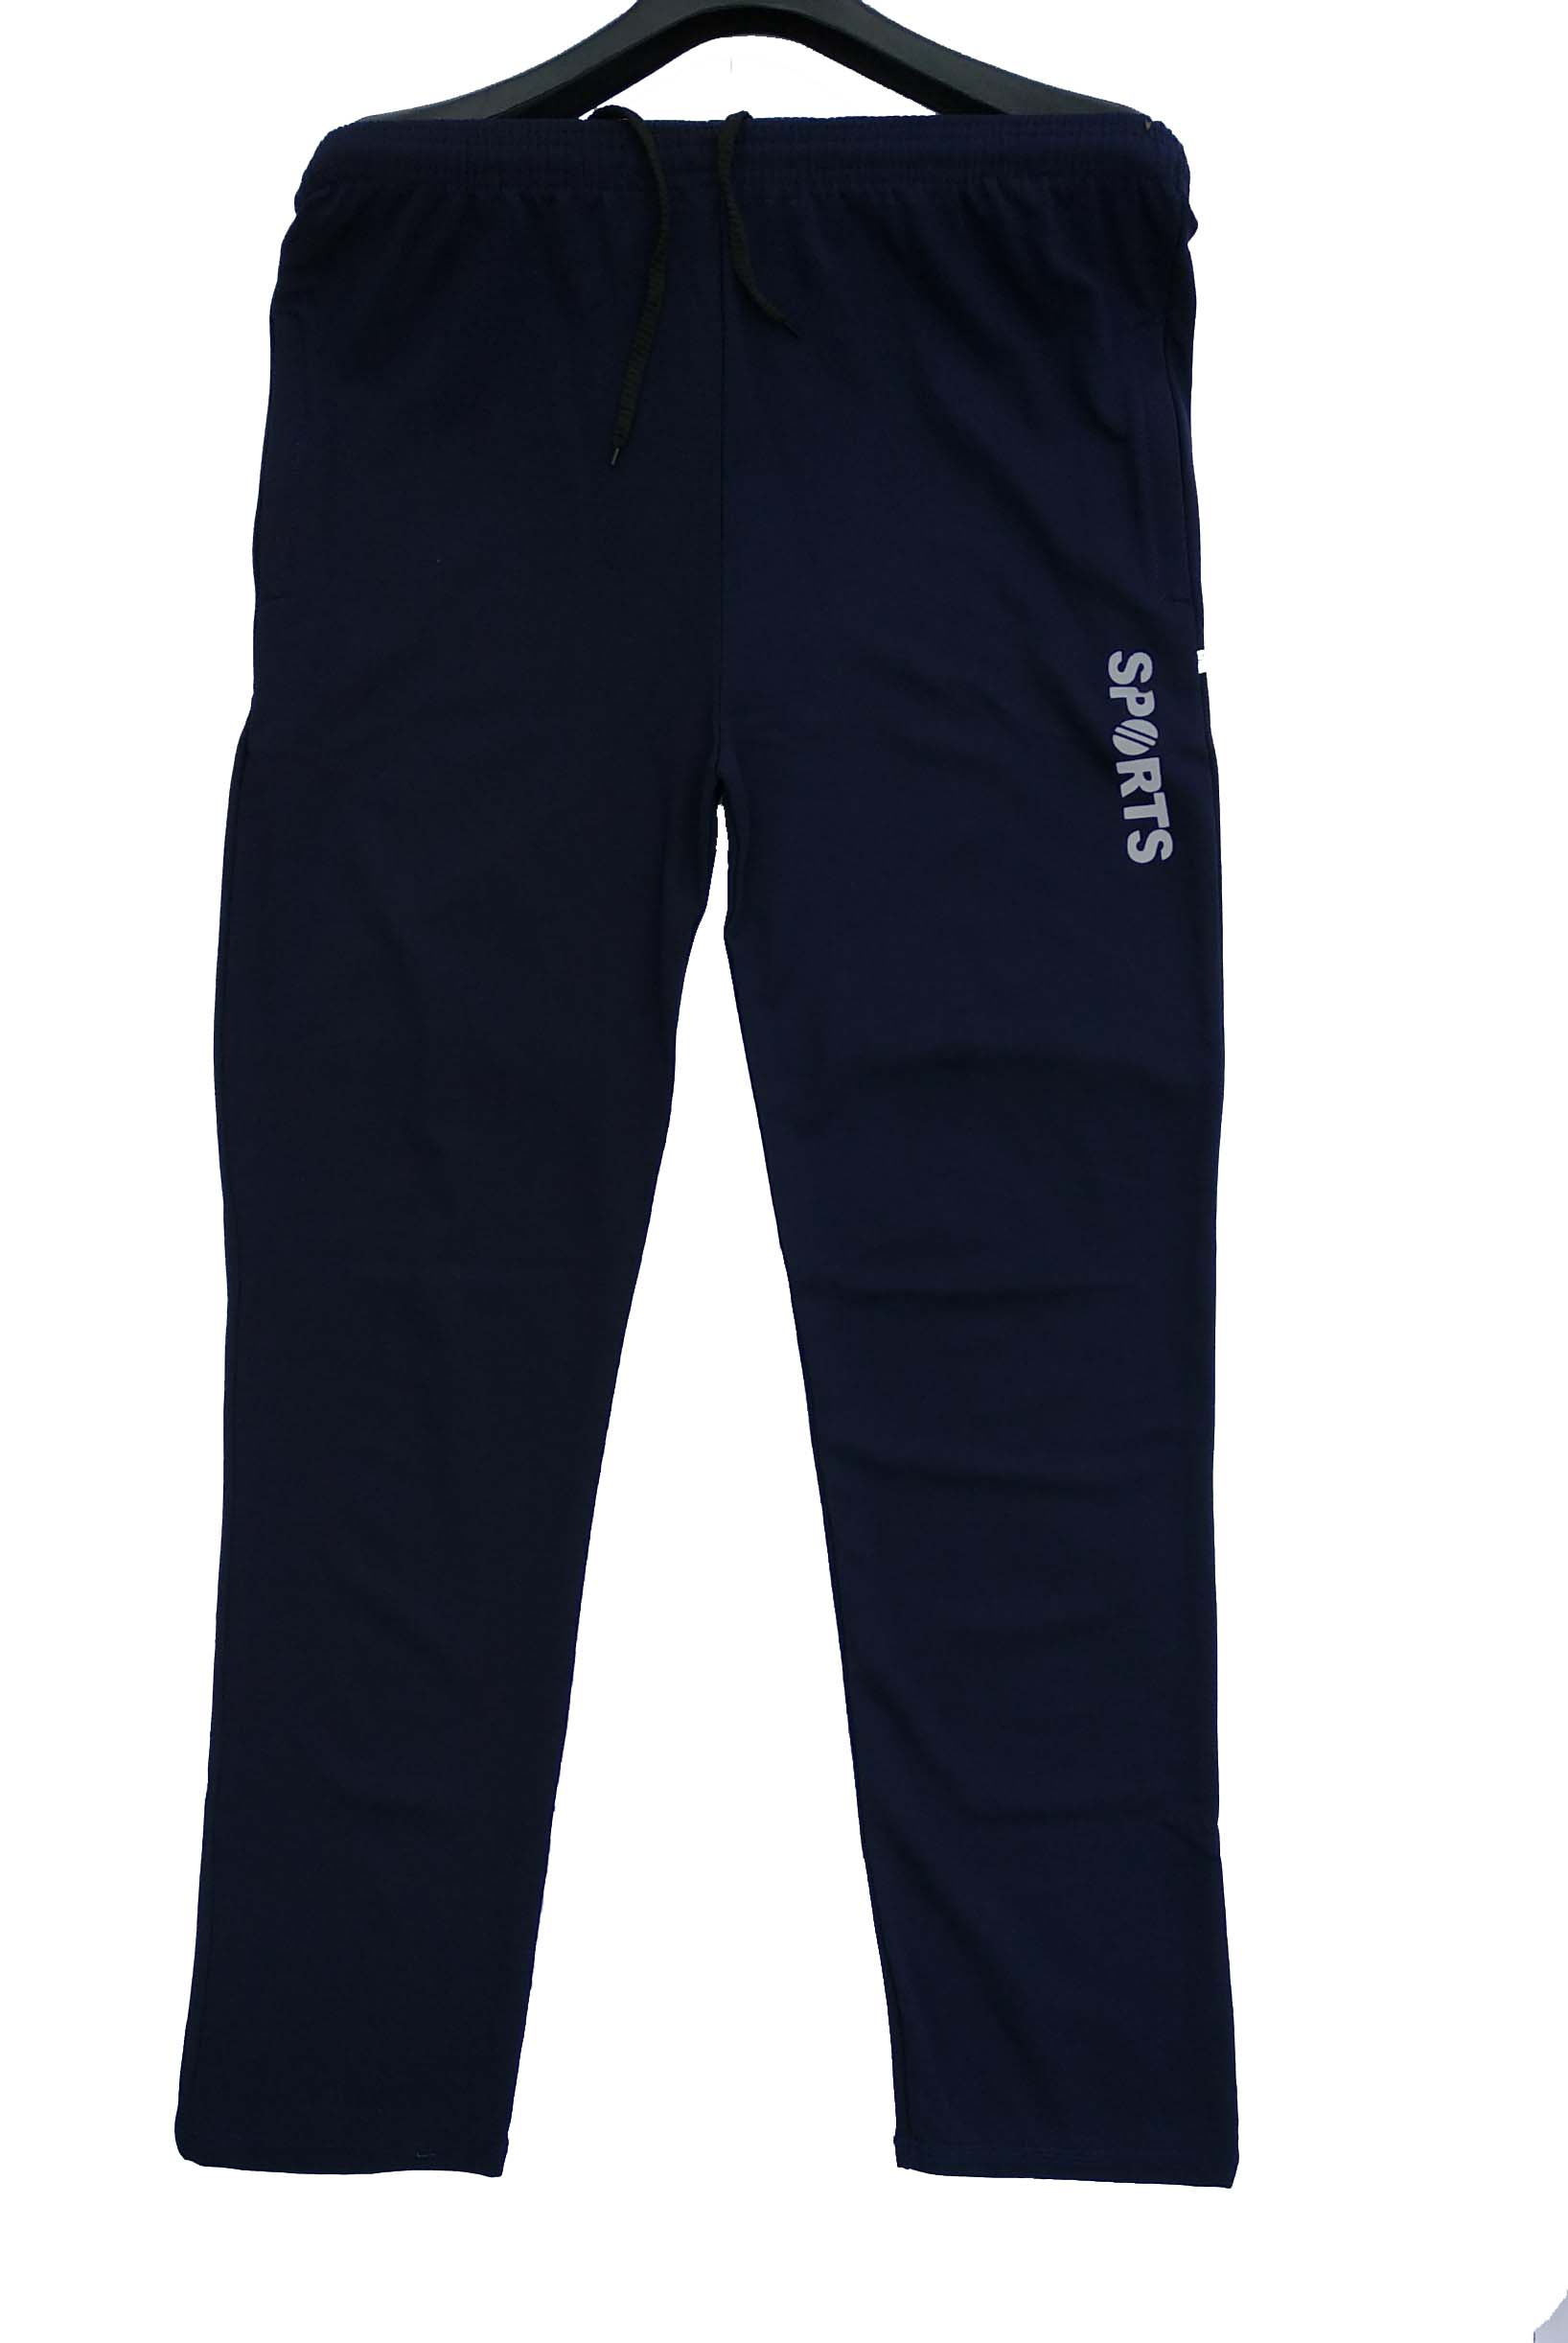 Buy Mens Track pant Online @ ₹345 from ShopClues